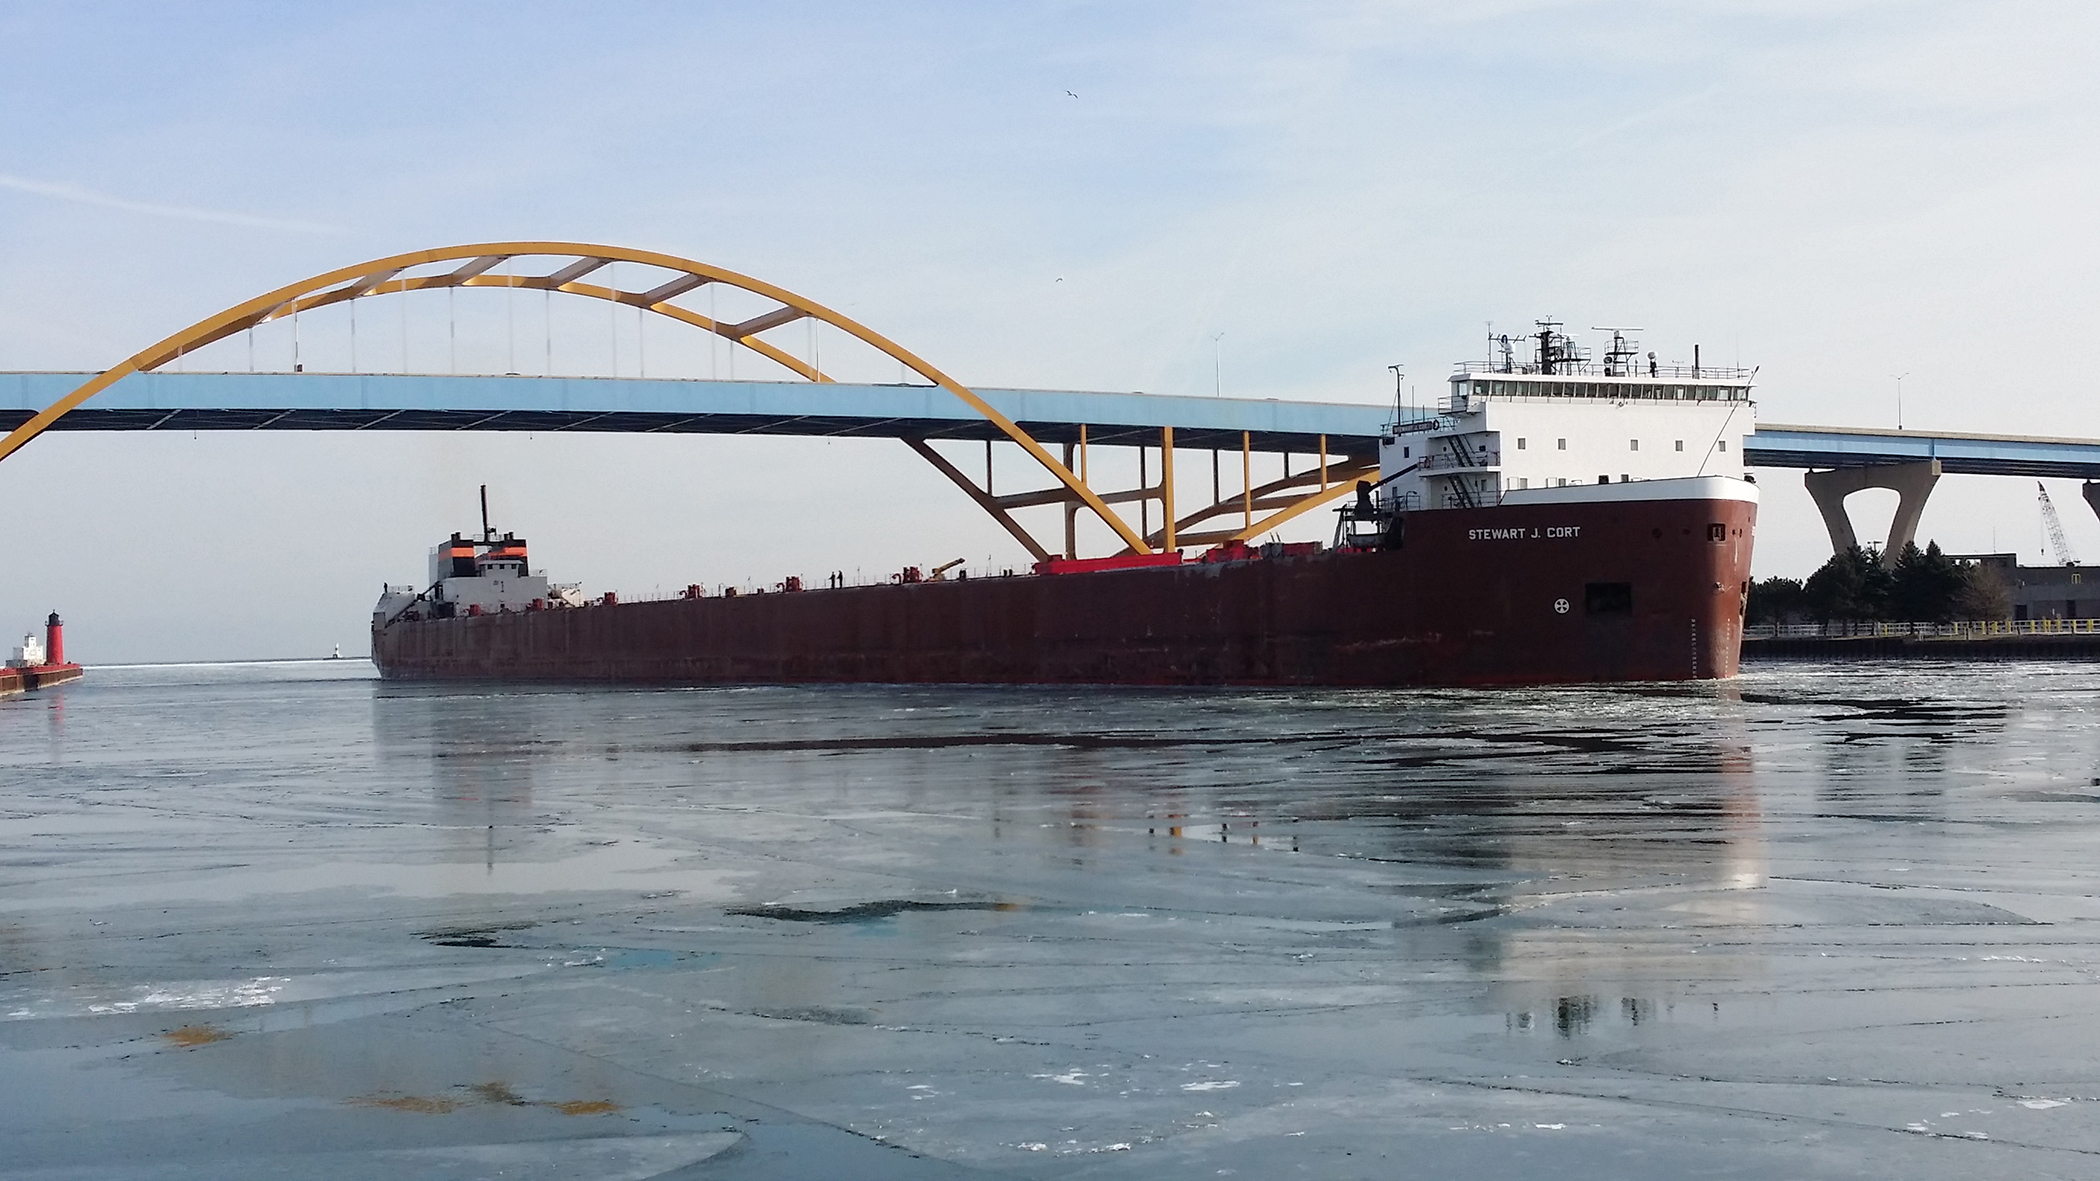 The Great Lakes freighter Stewart J. Cort